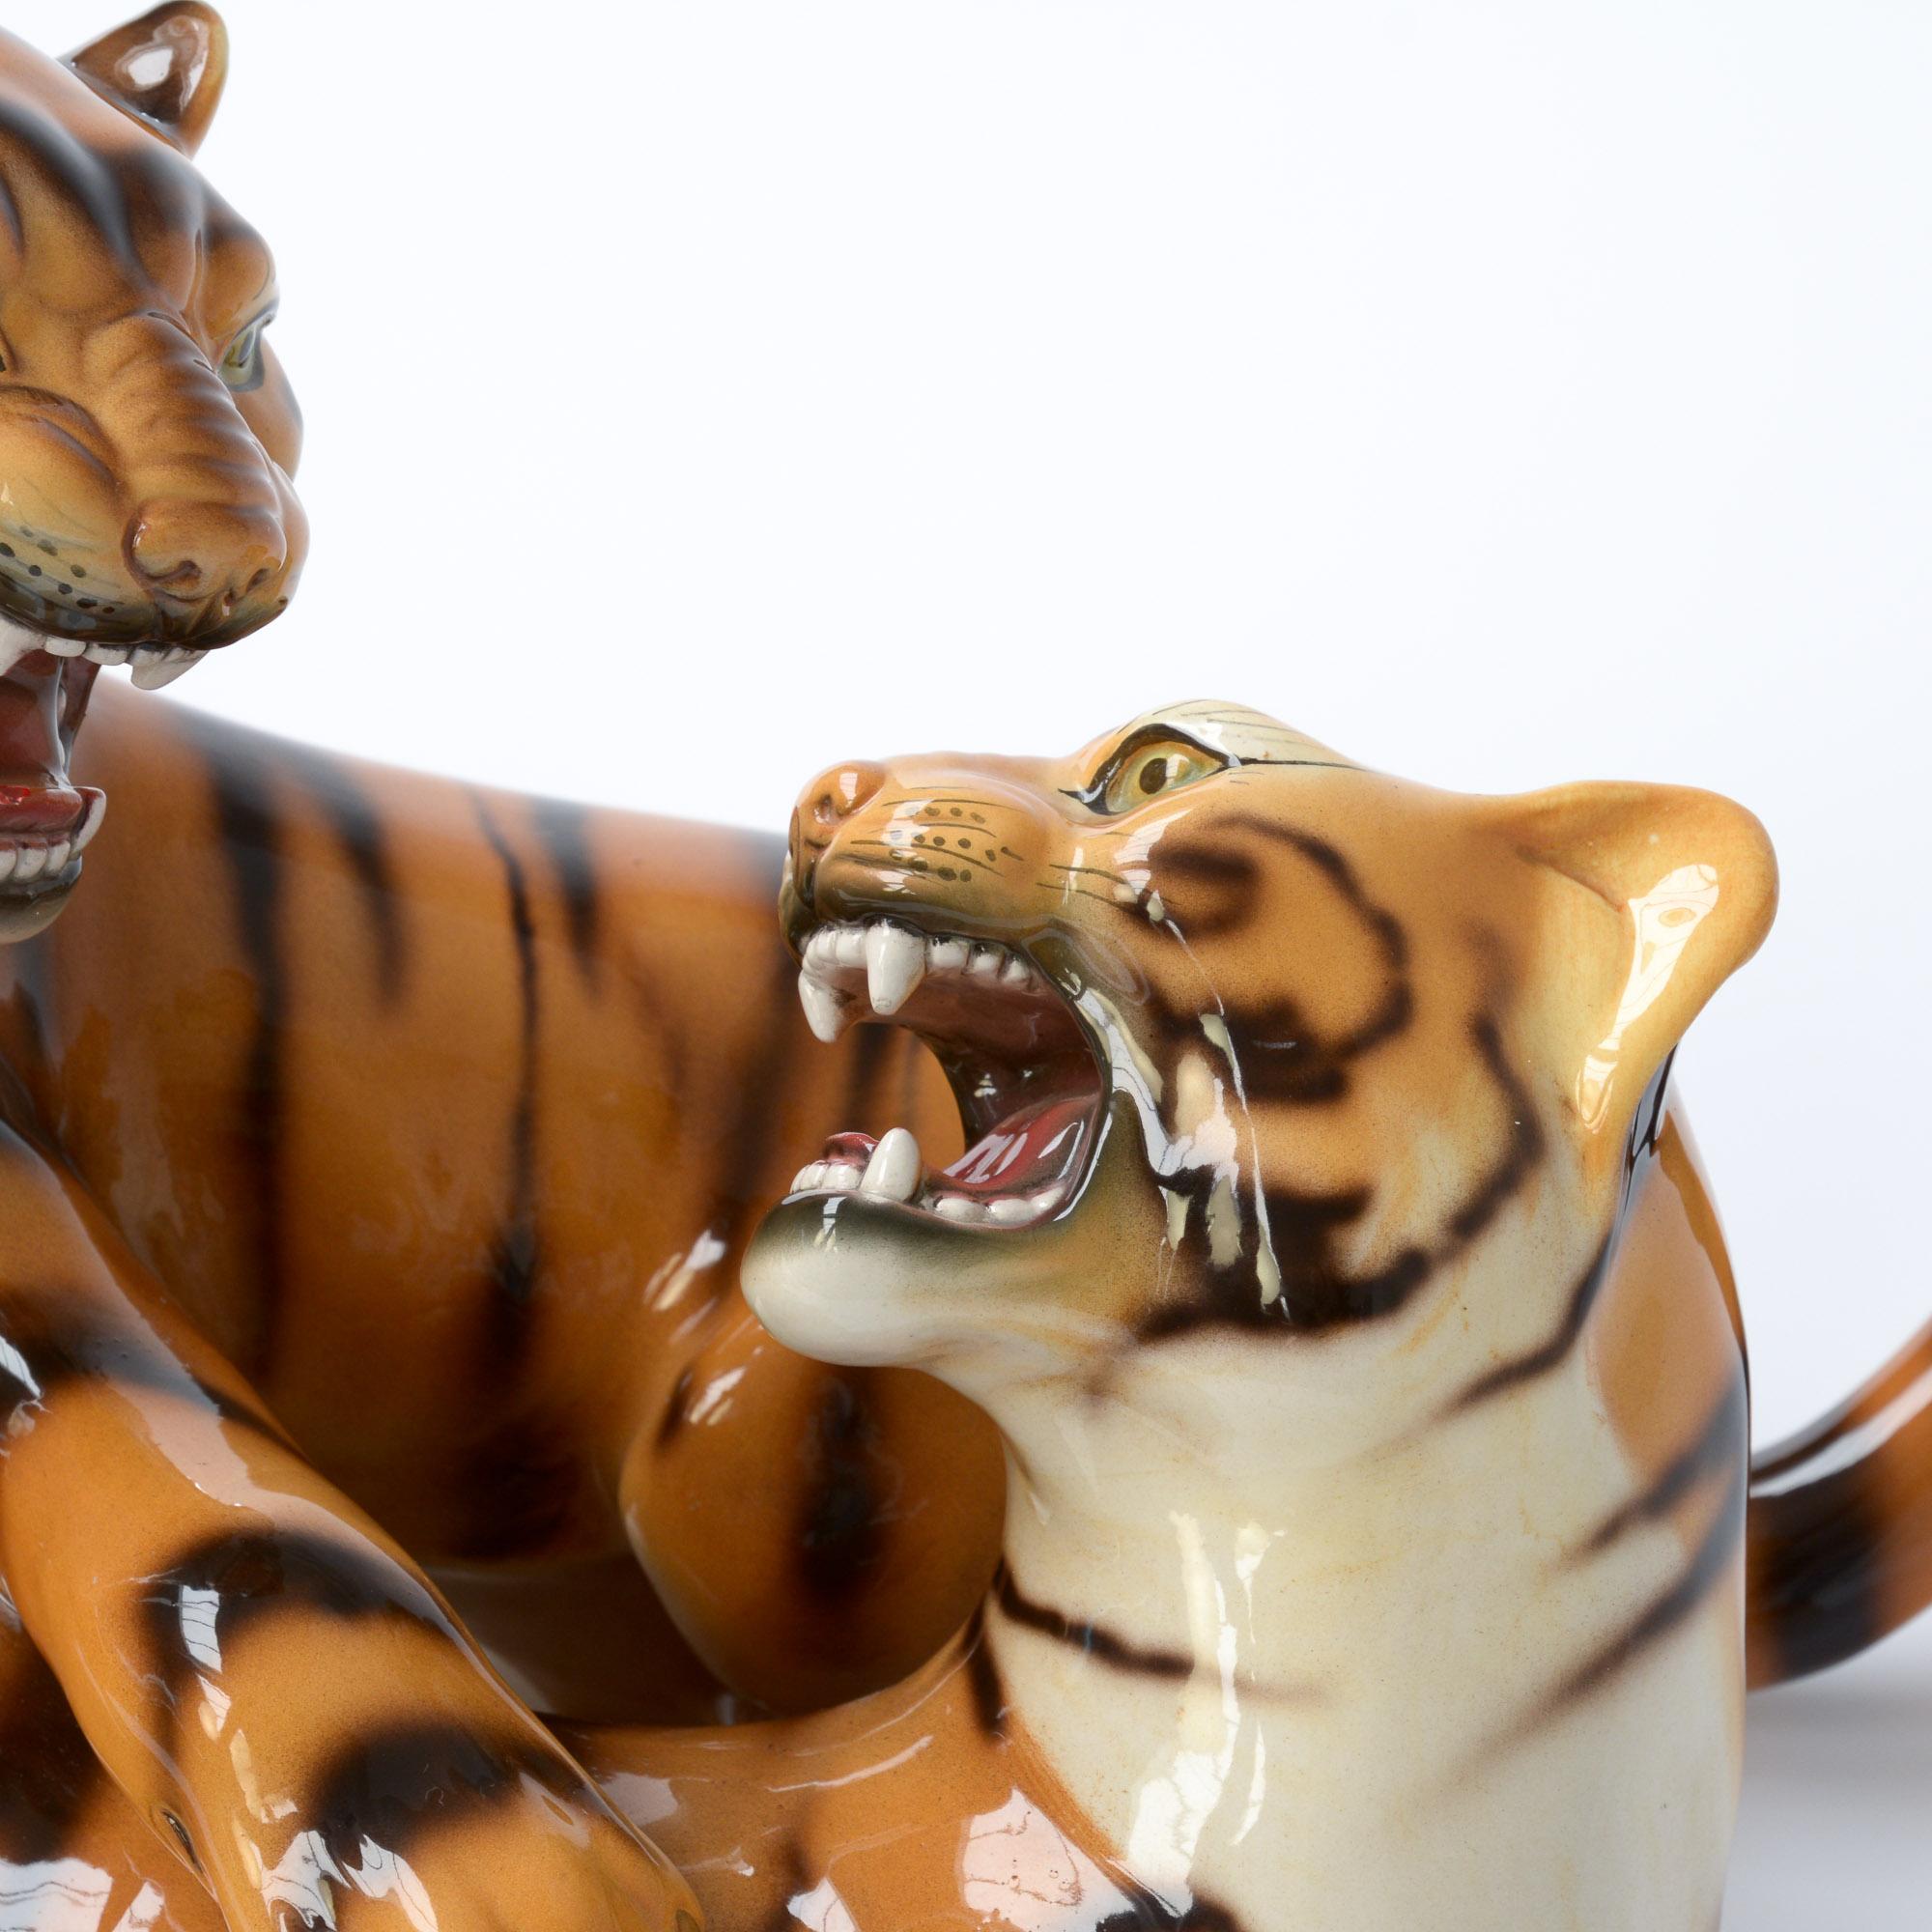 Hand-Painted Porcelain Sculpture of Playing Tigers by Ronzan, Italy